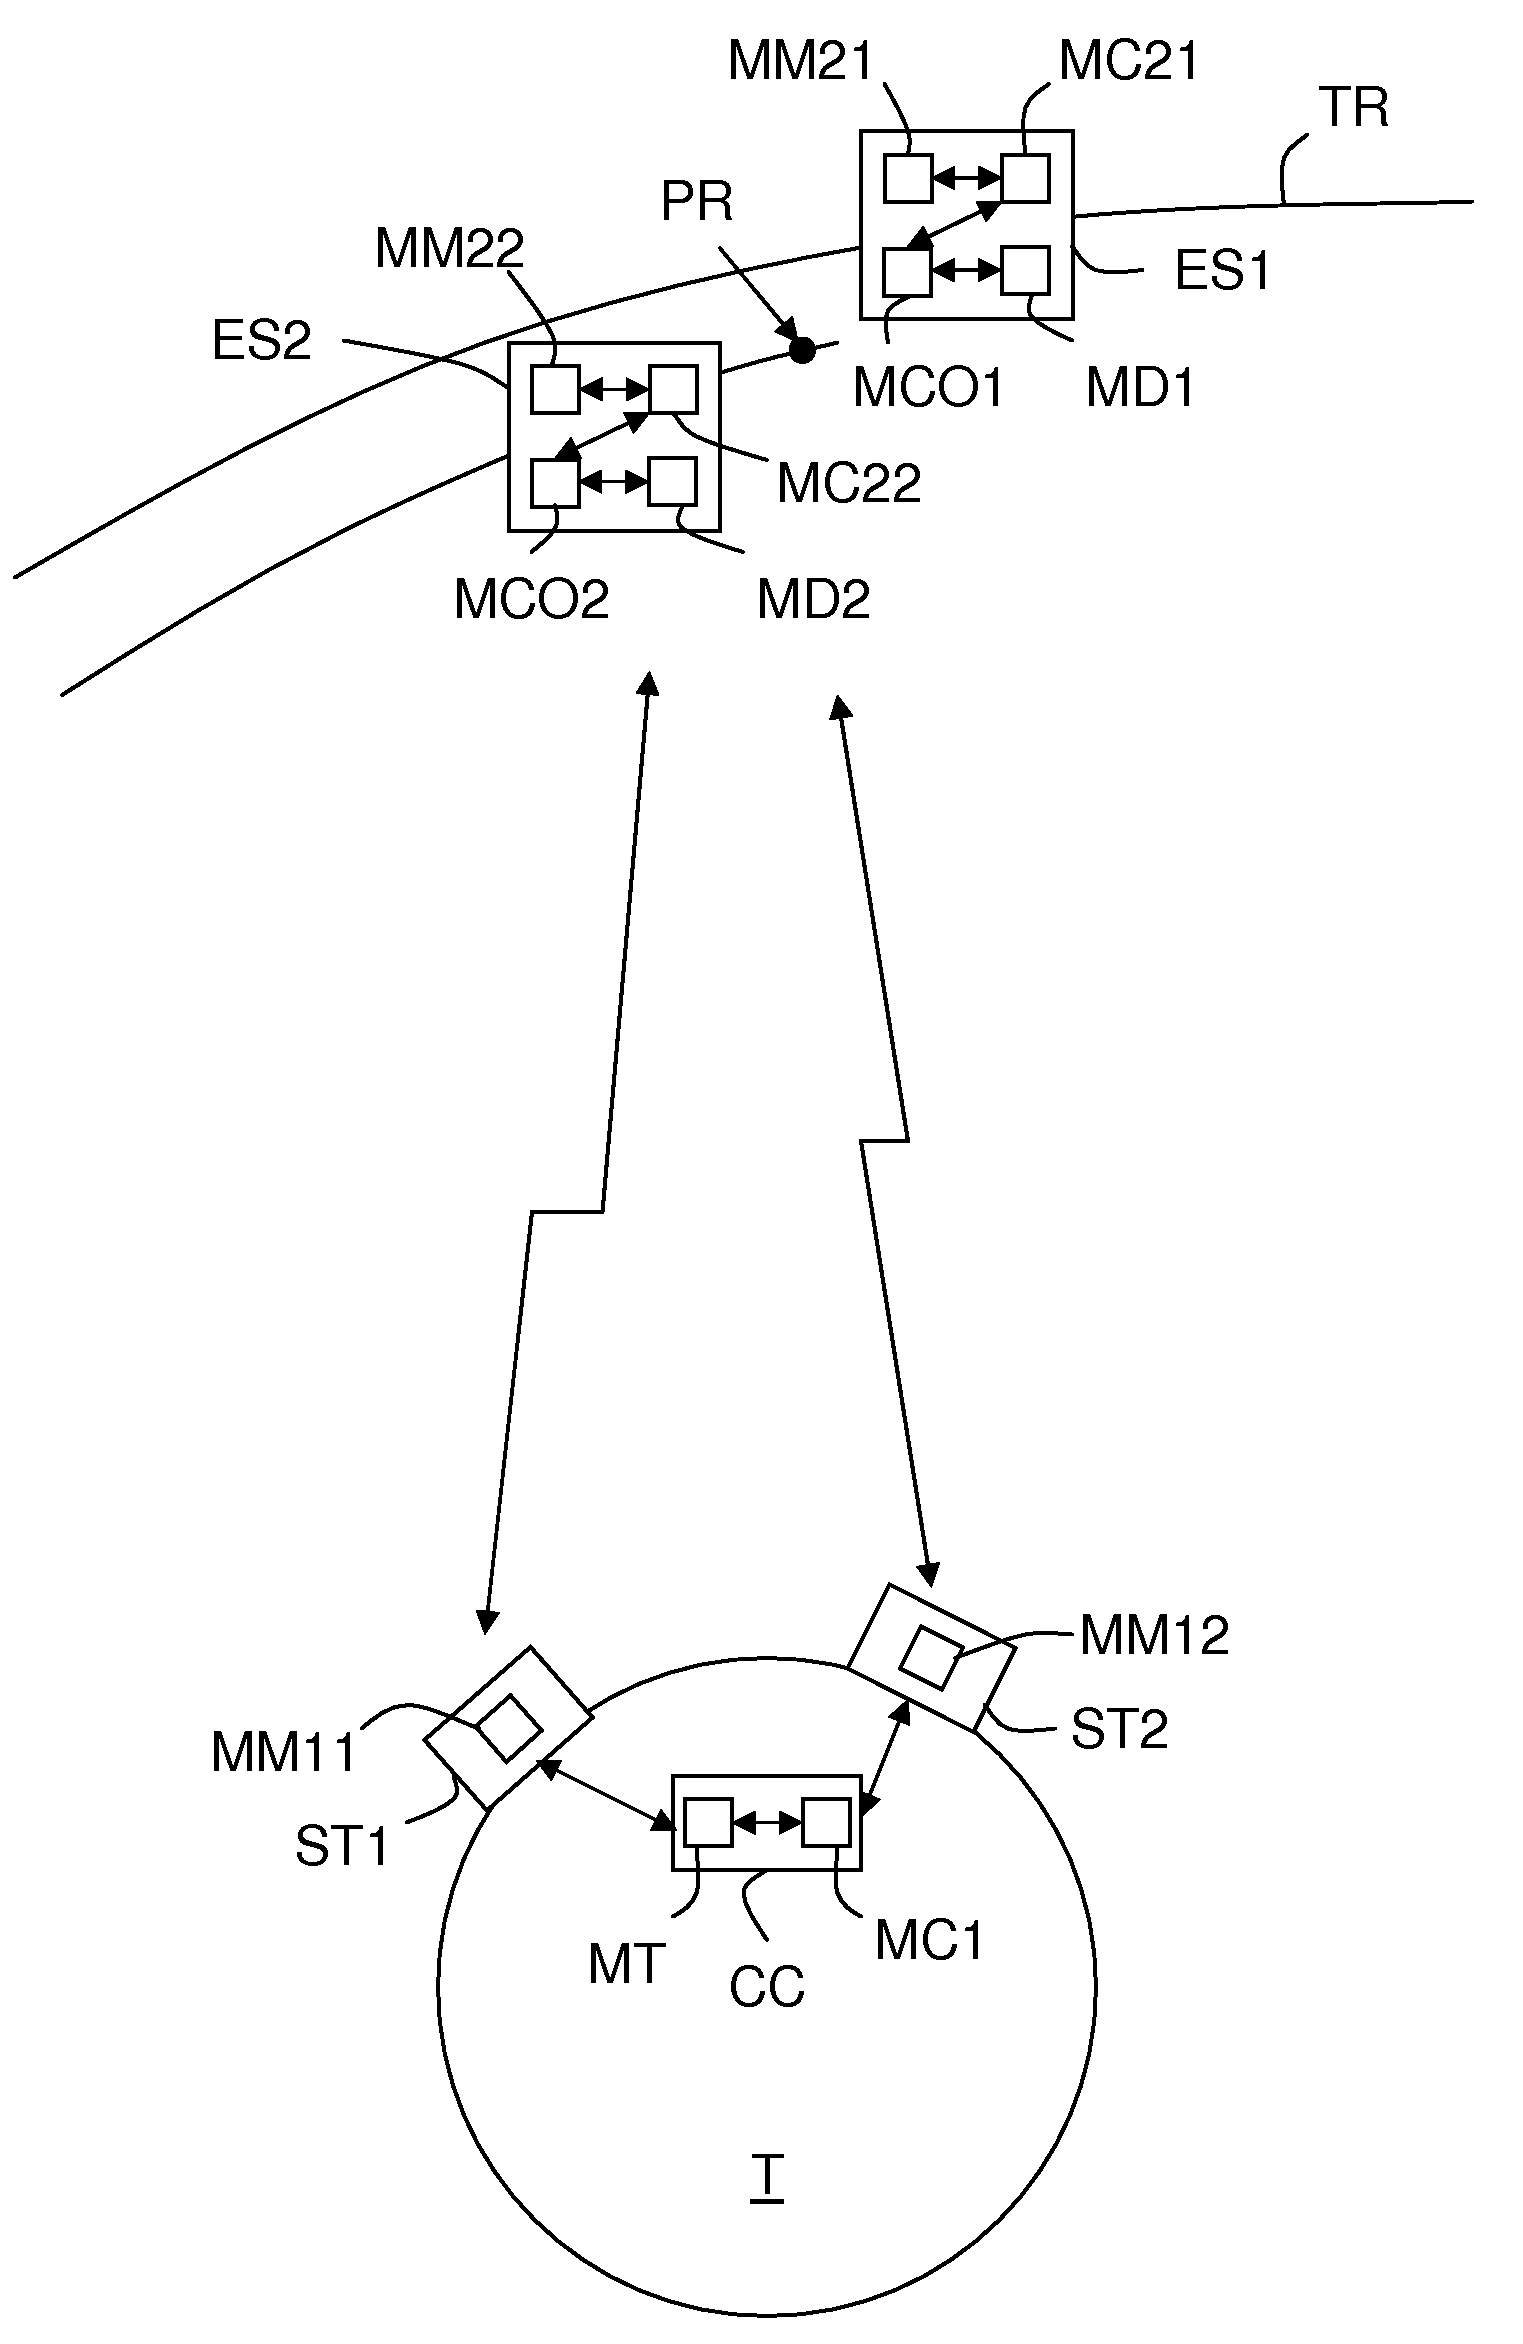 System for controlling the deployment of spacecraft required to fly in formation, by simultaneous and high-precision determination of their positions